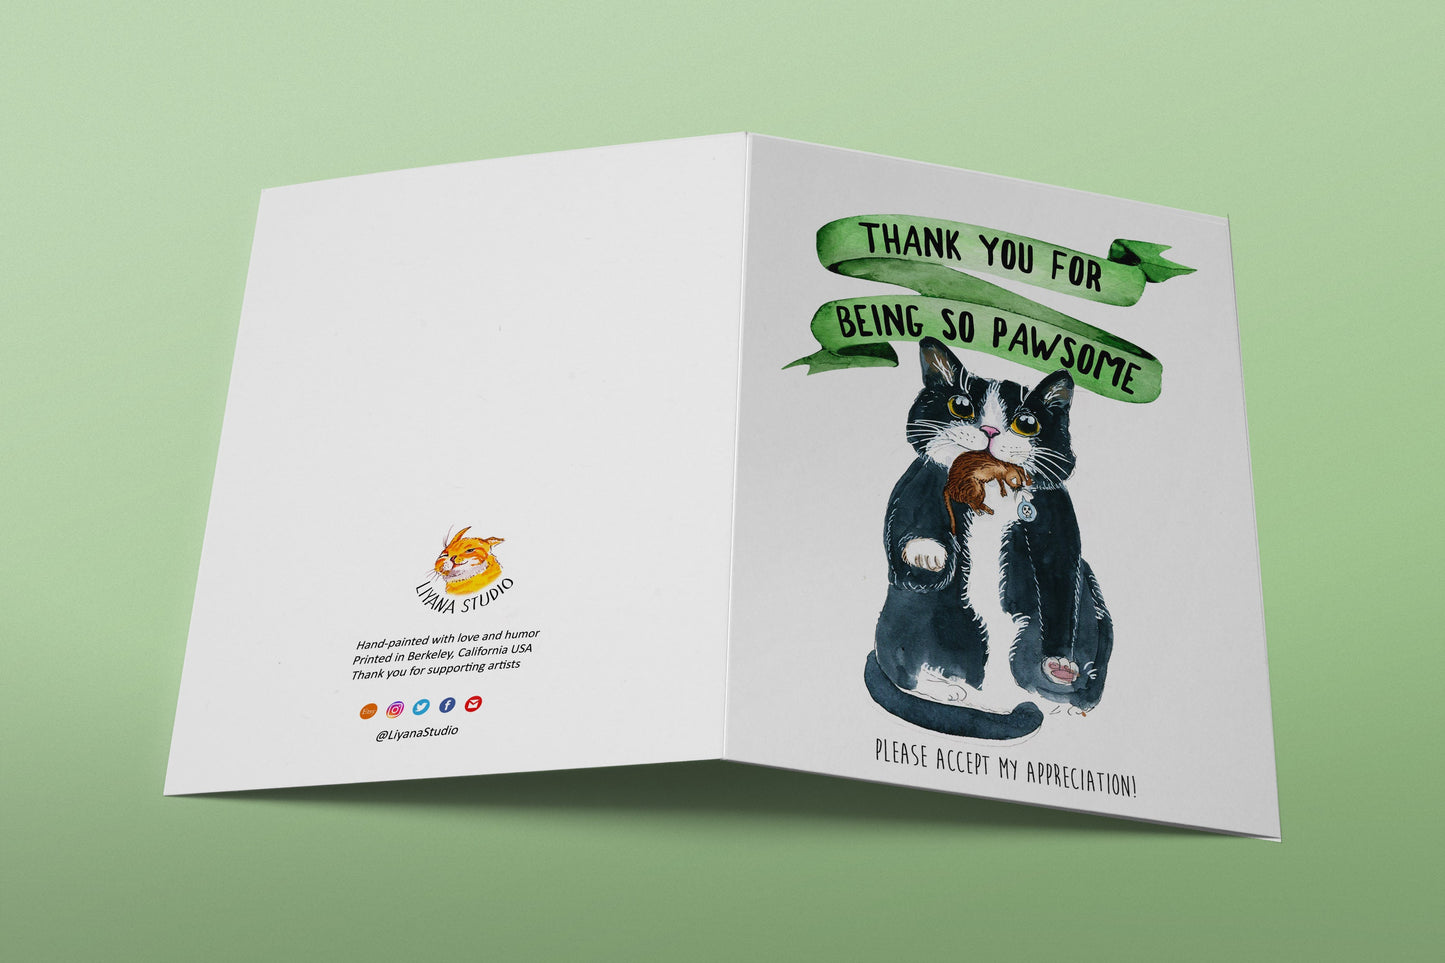 Funny Thank You Cards From Cat - Tuxedo Cats Appreciation Gift For Friends